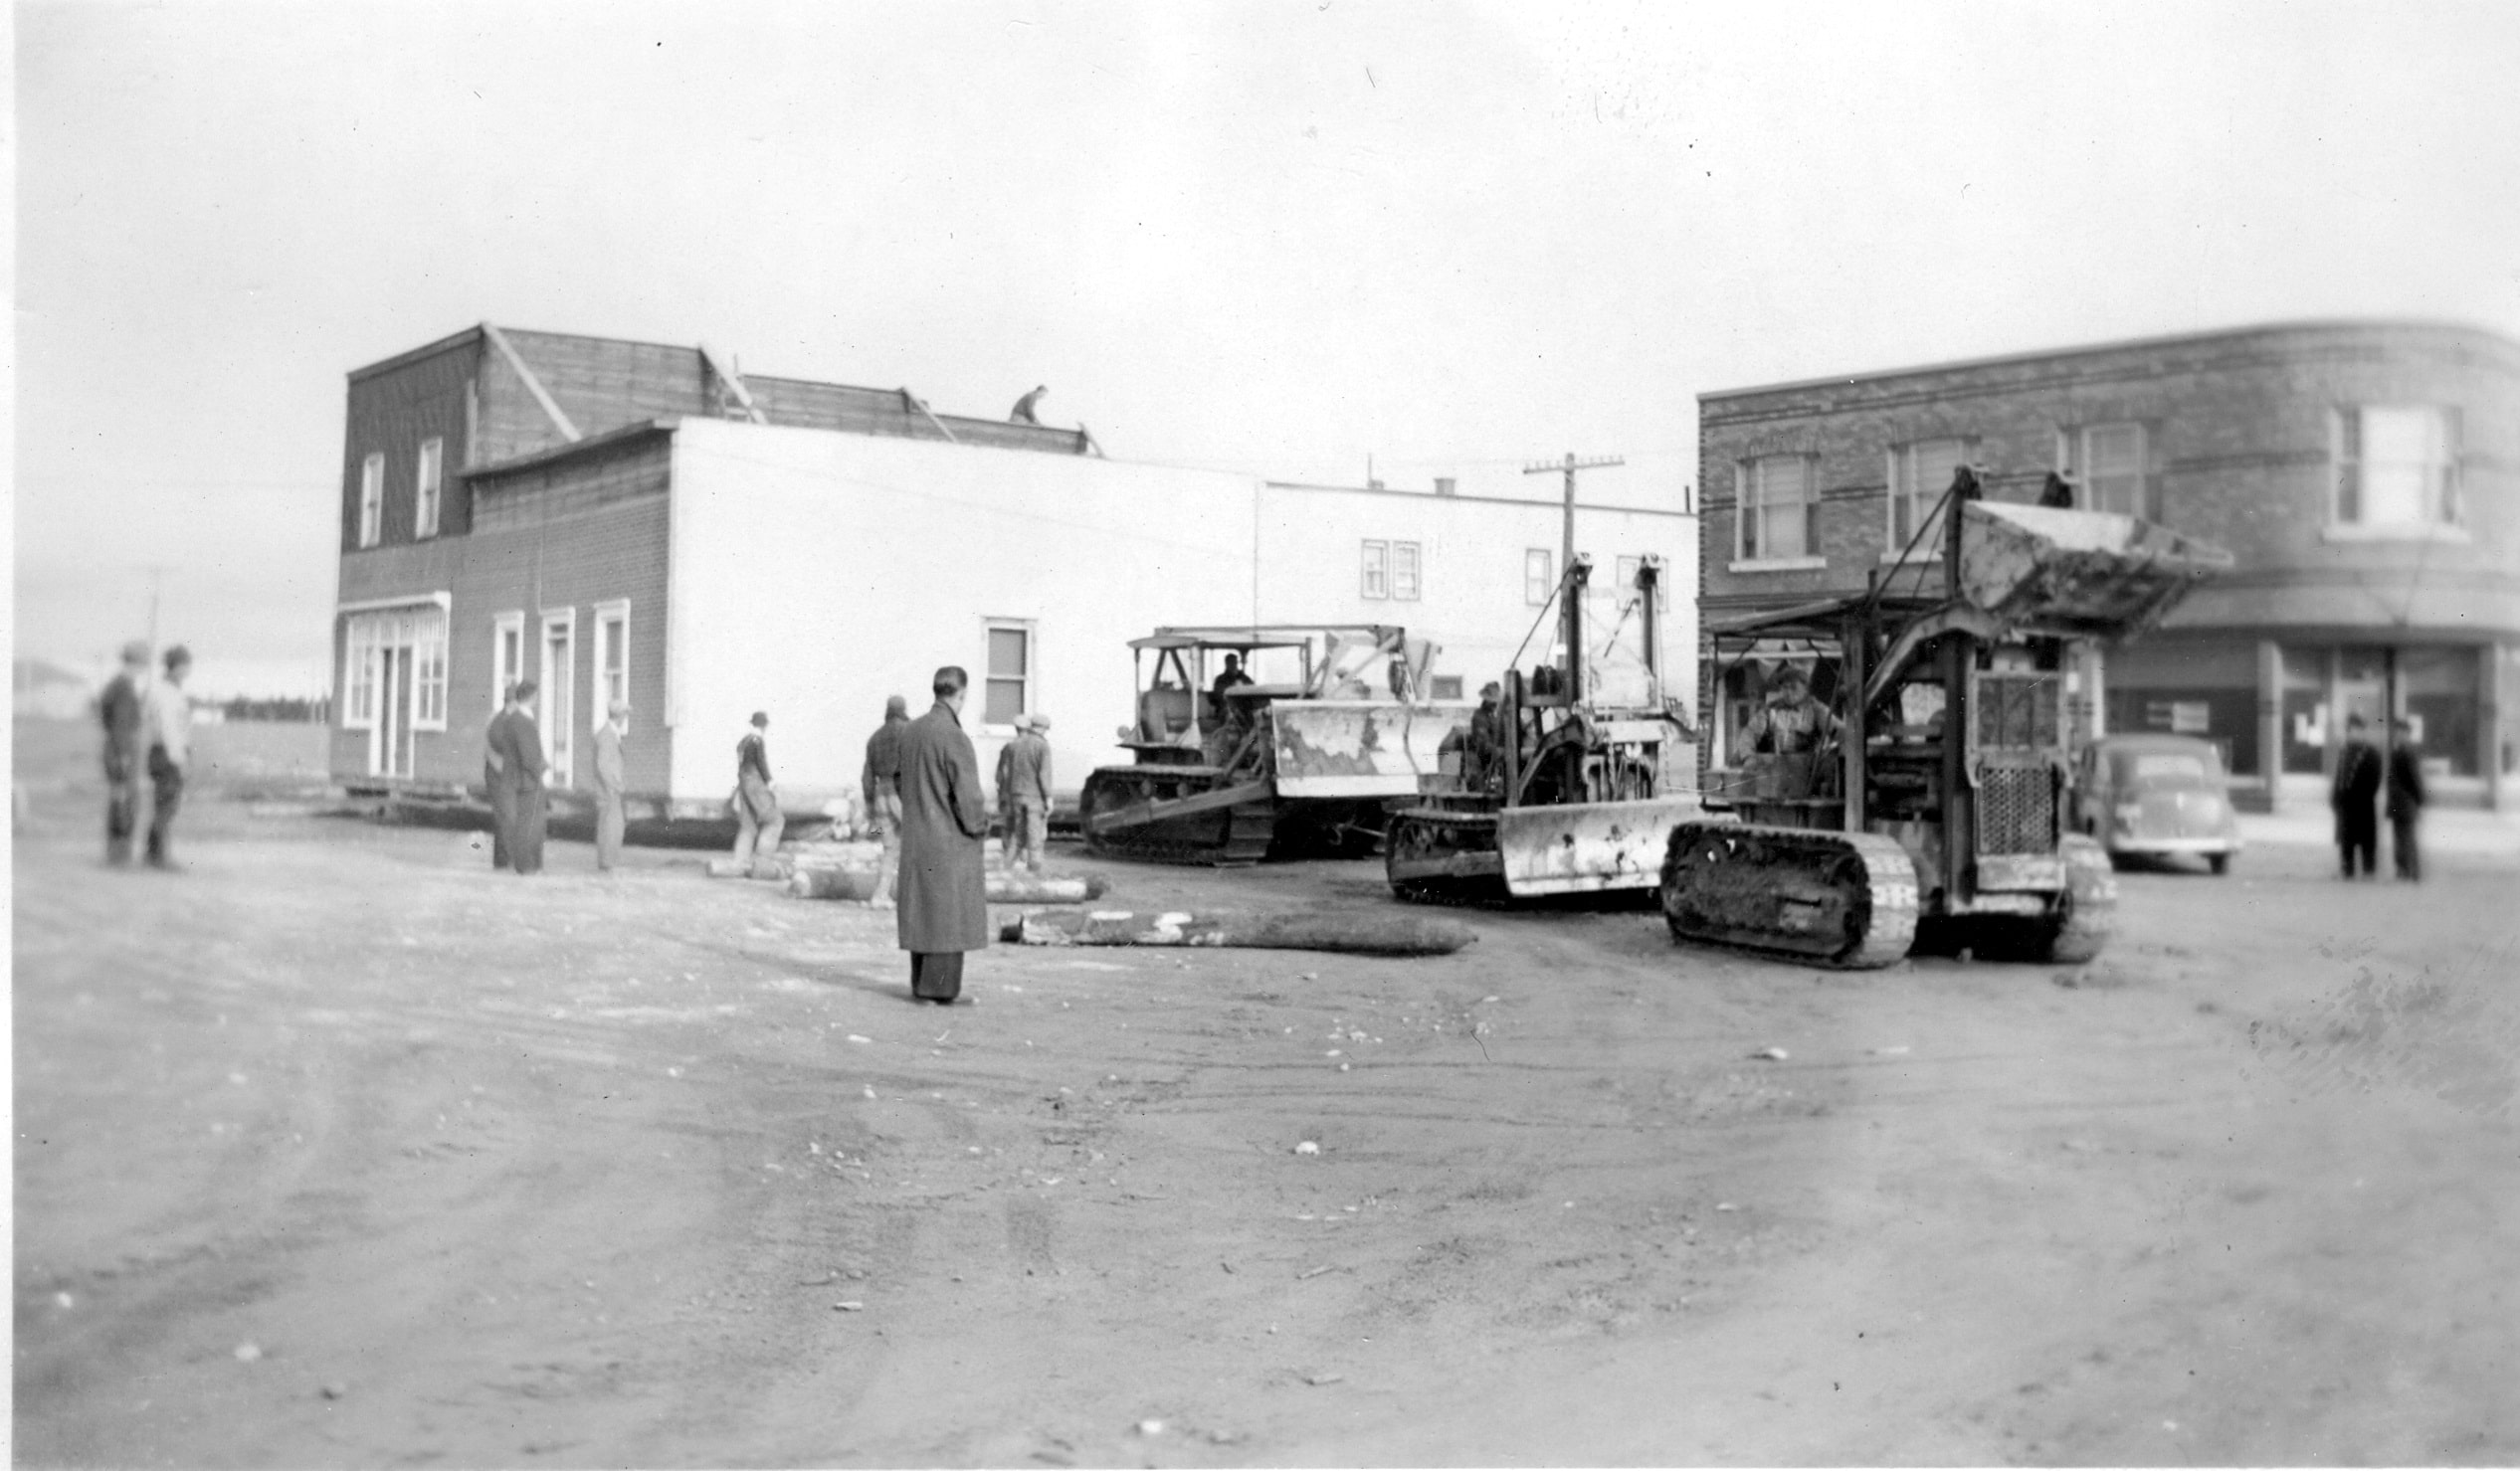 Black and white photograph of a two-storey building being pulled by three tractors. The logs used to roll the building are laid down in front. A person is on the roof. Several curious onlookers attend the scene.